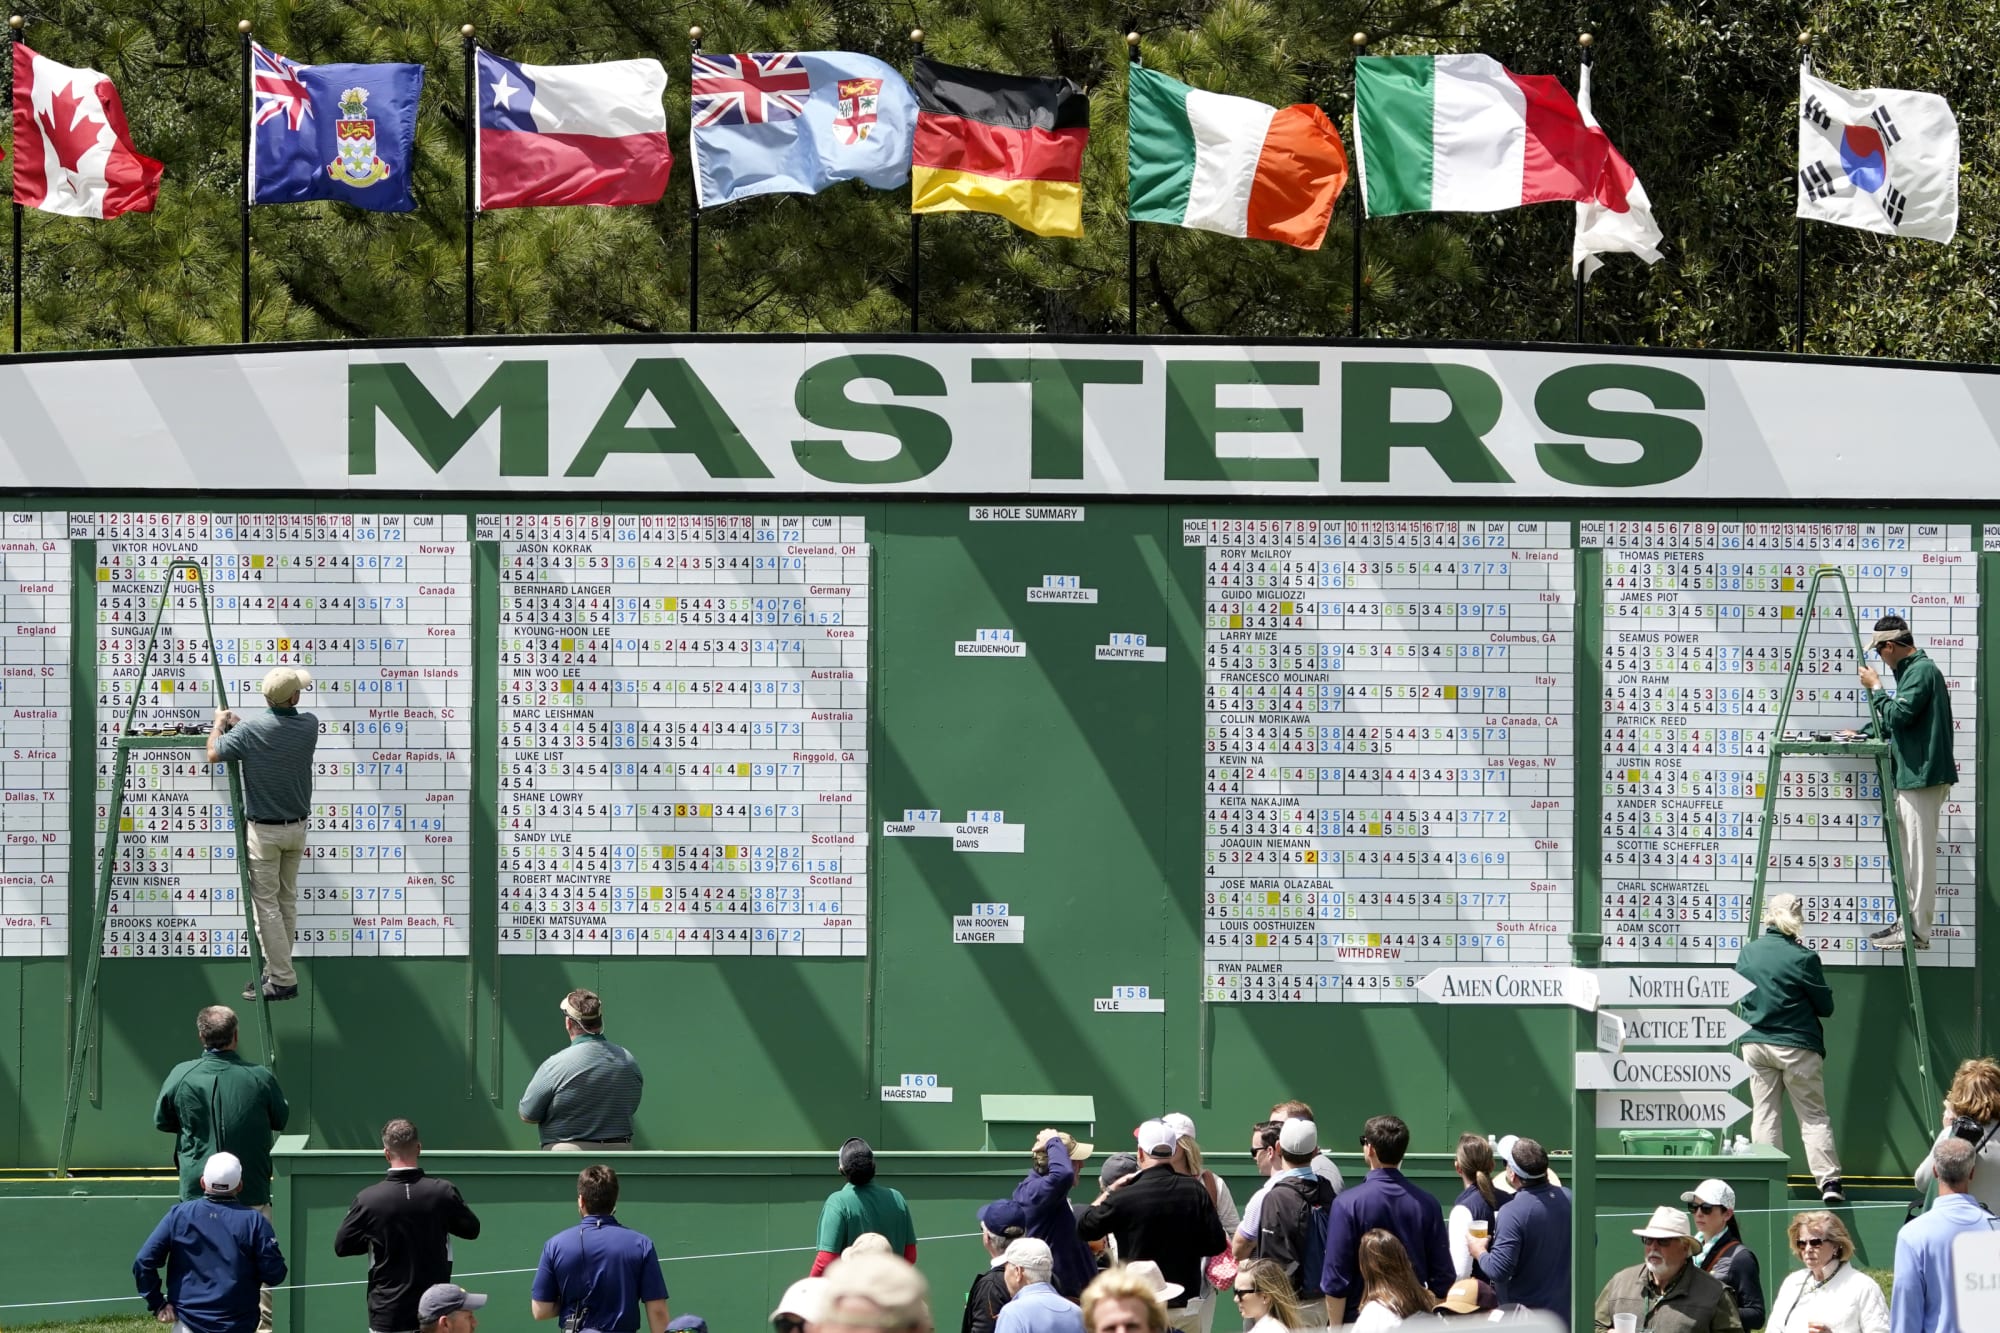 The Masters allows qualified LIV golfers to play in 2023